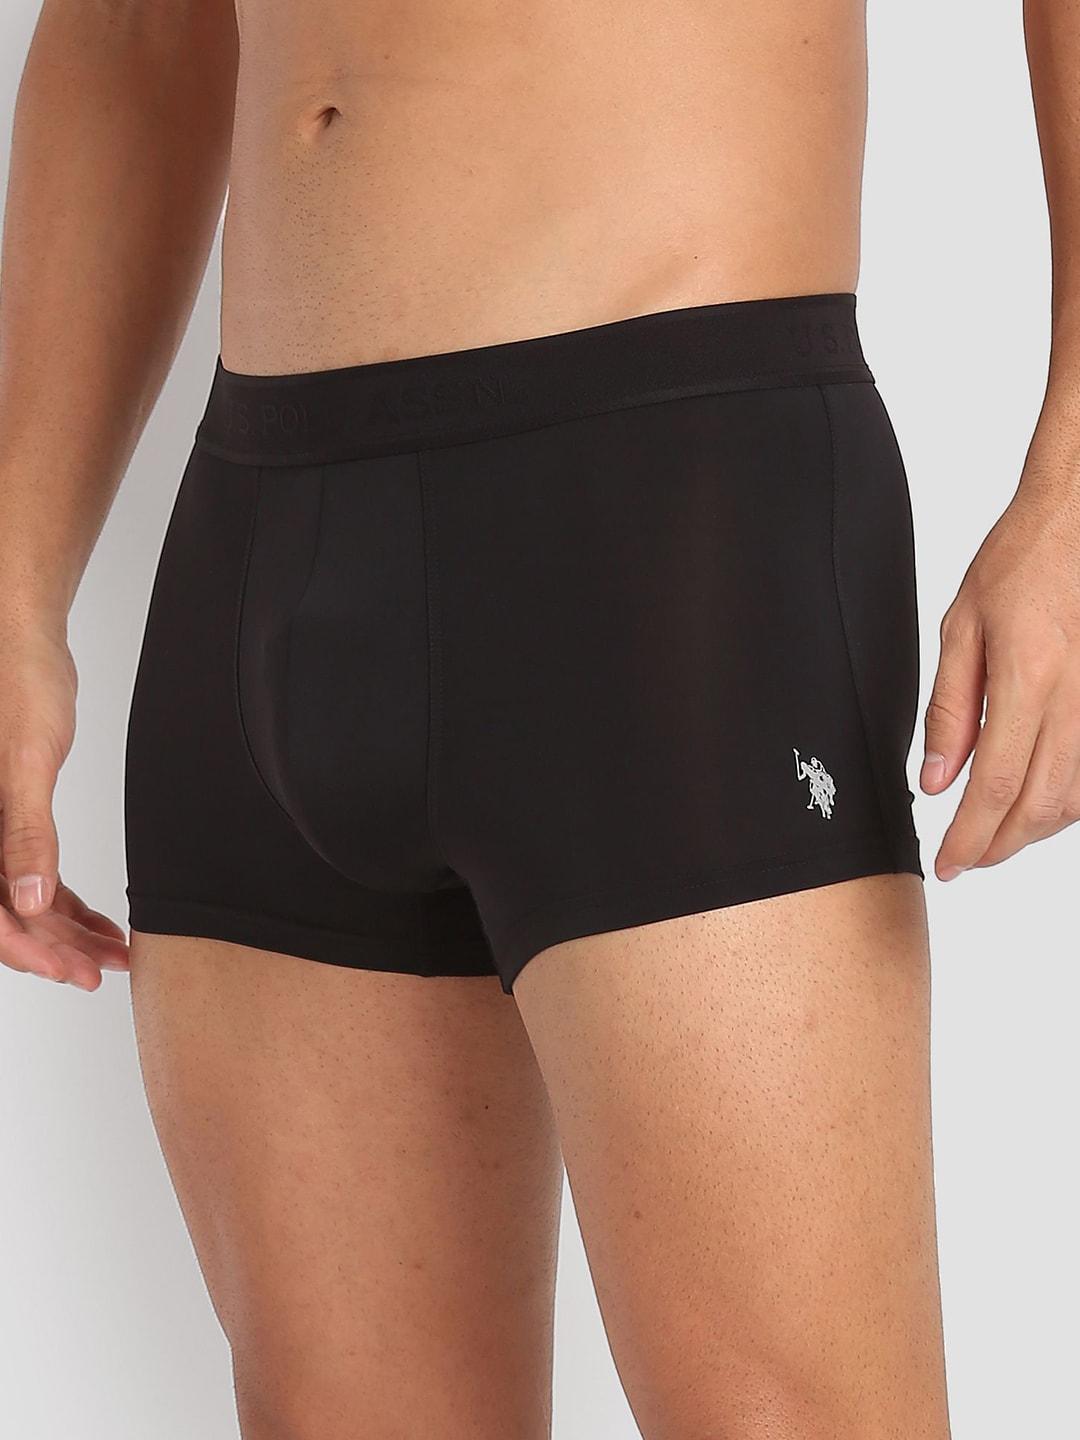 U.S. Polo Assn. Men Moisture Wicking Stretchable Trunk